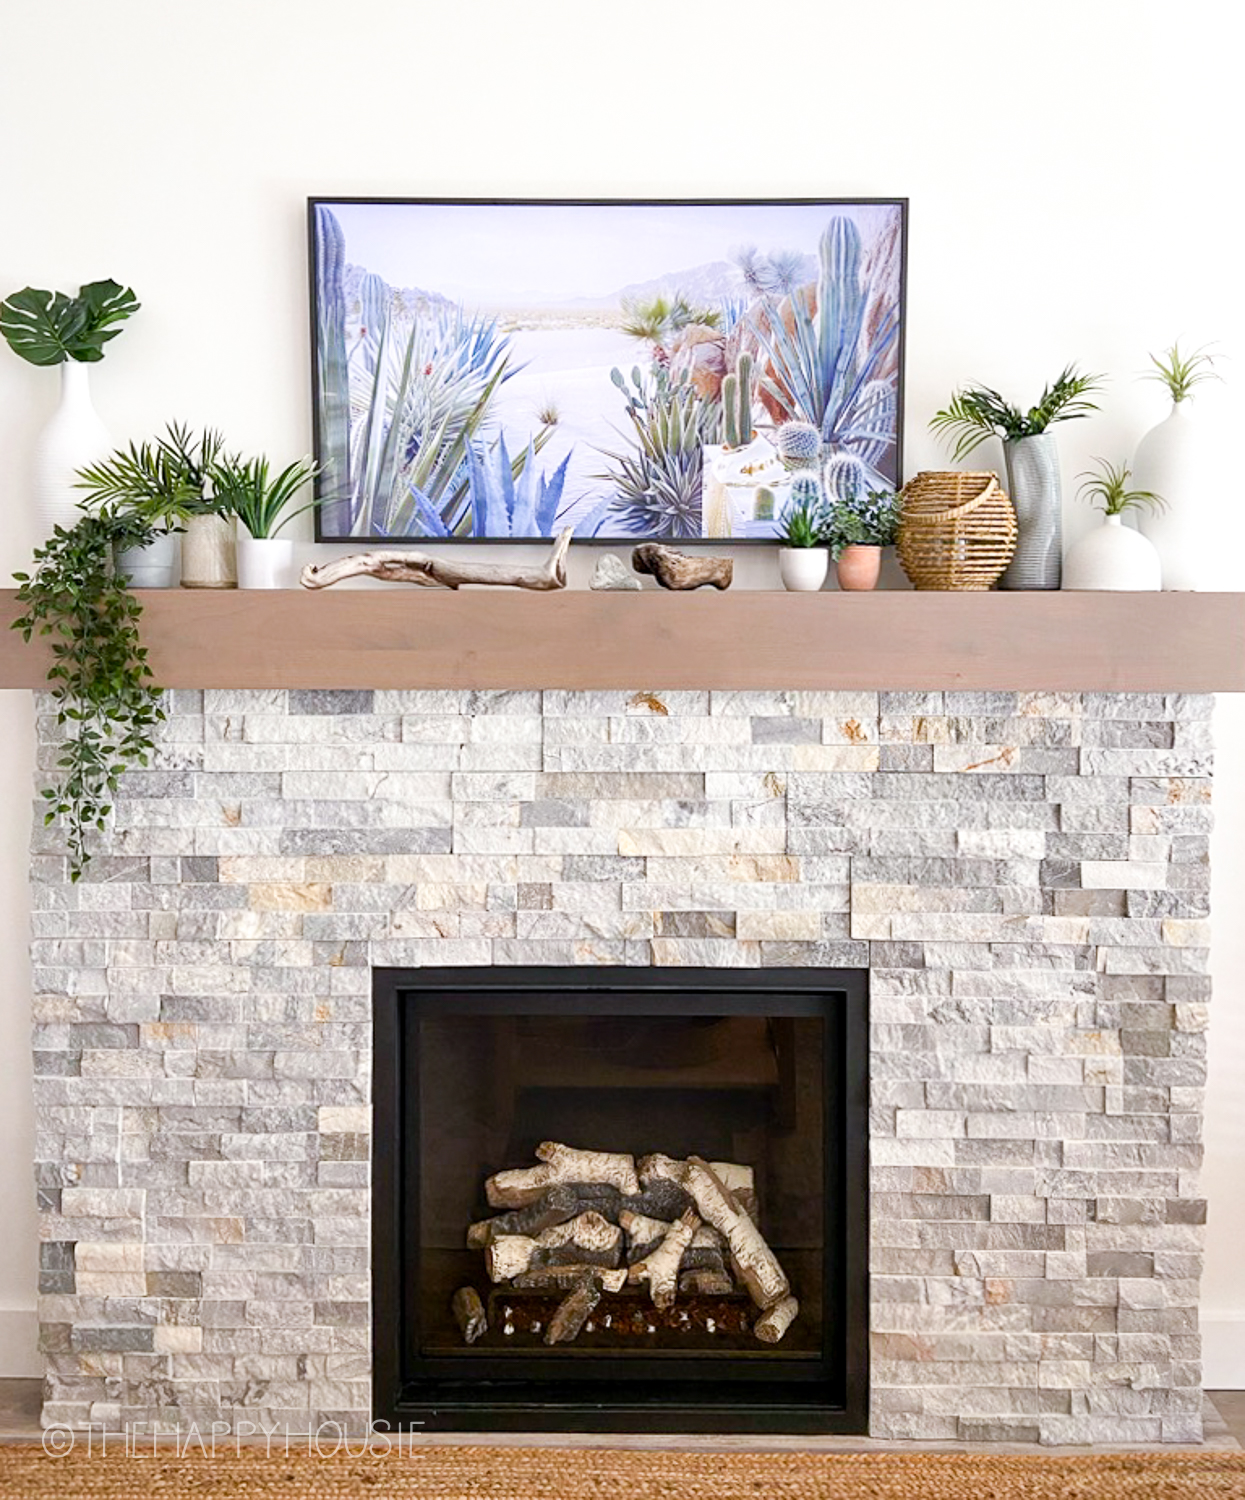 The stone fireplace with a Frame TV on the mantel.